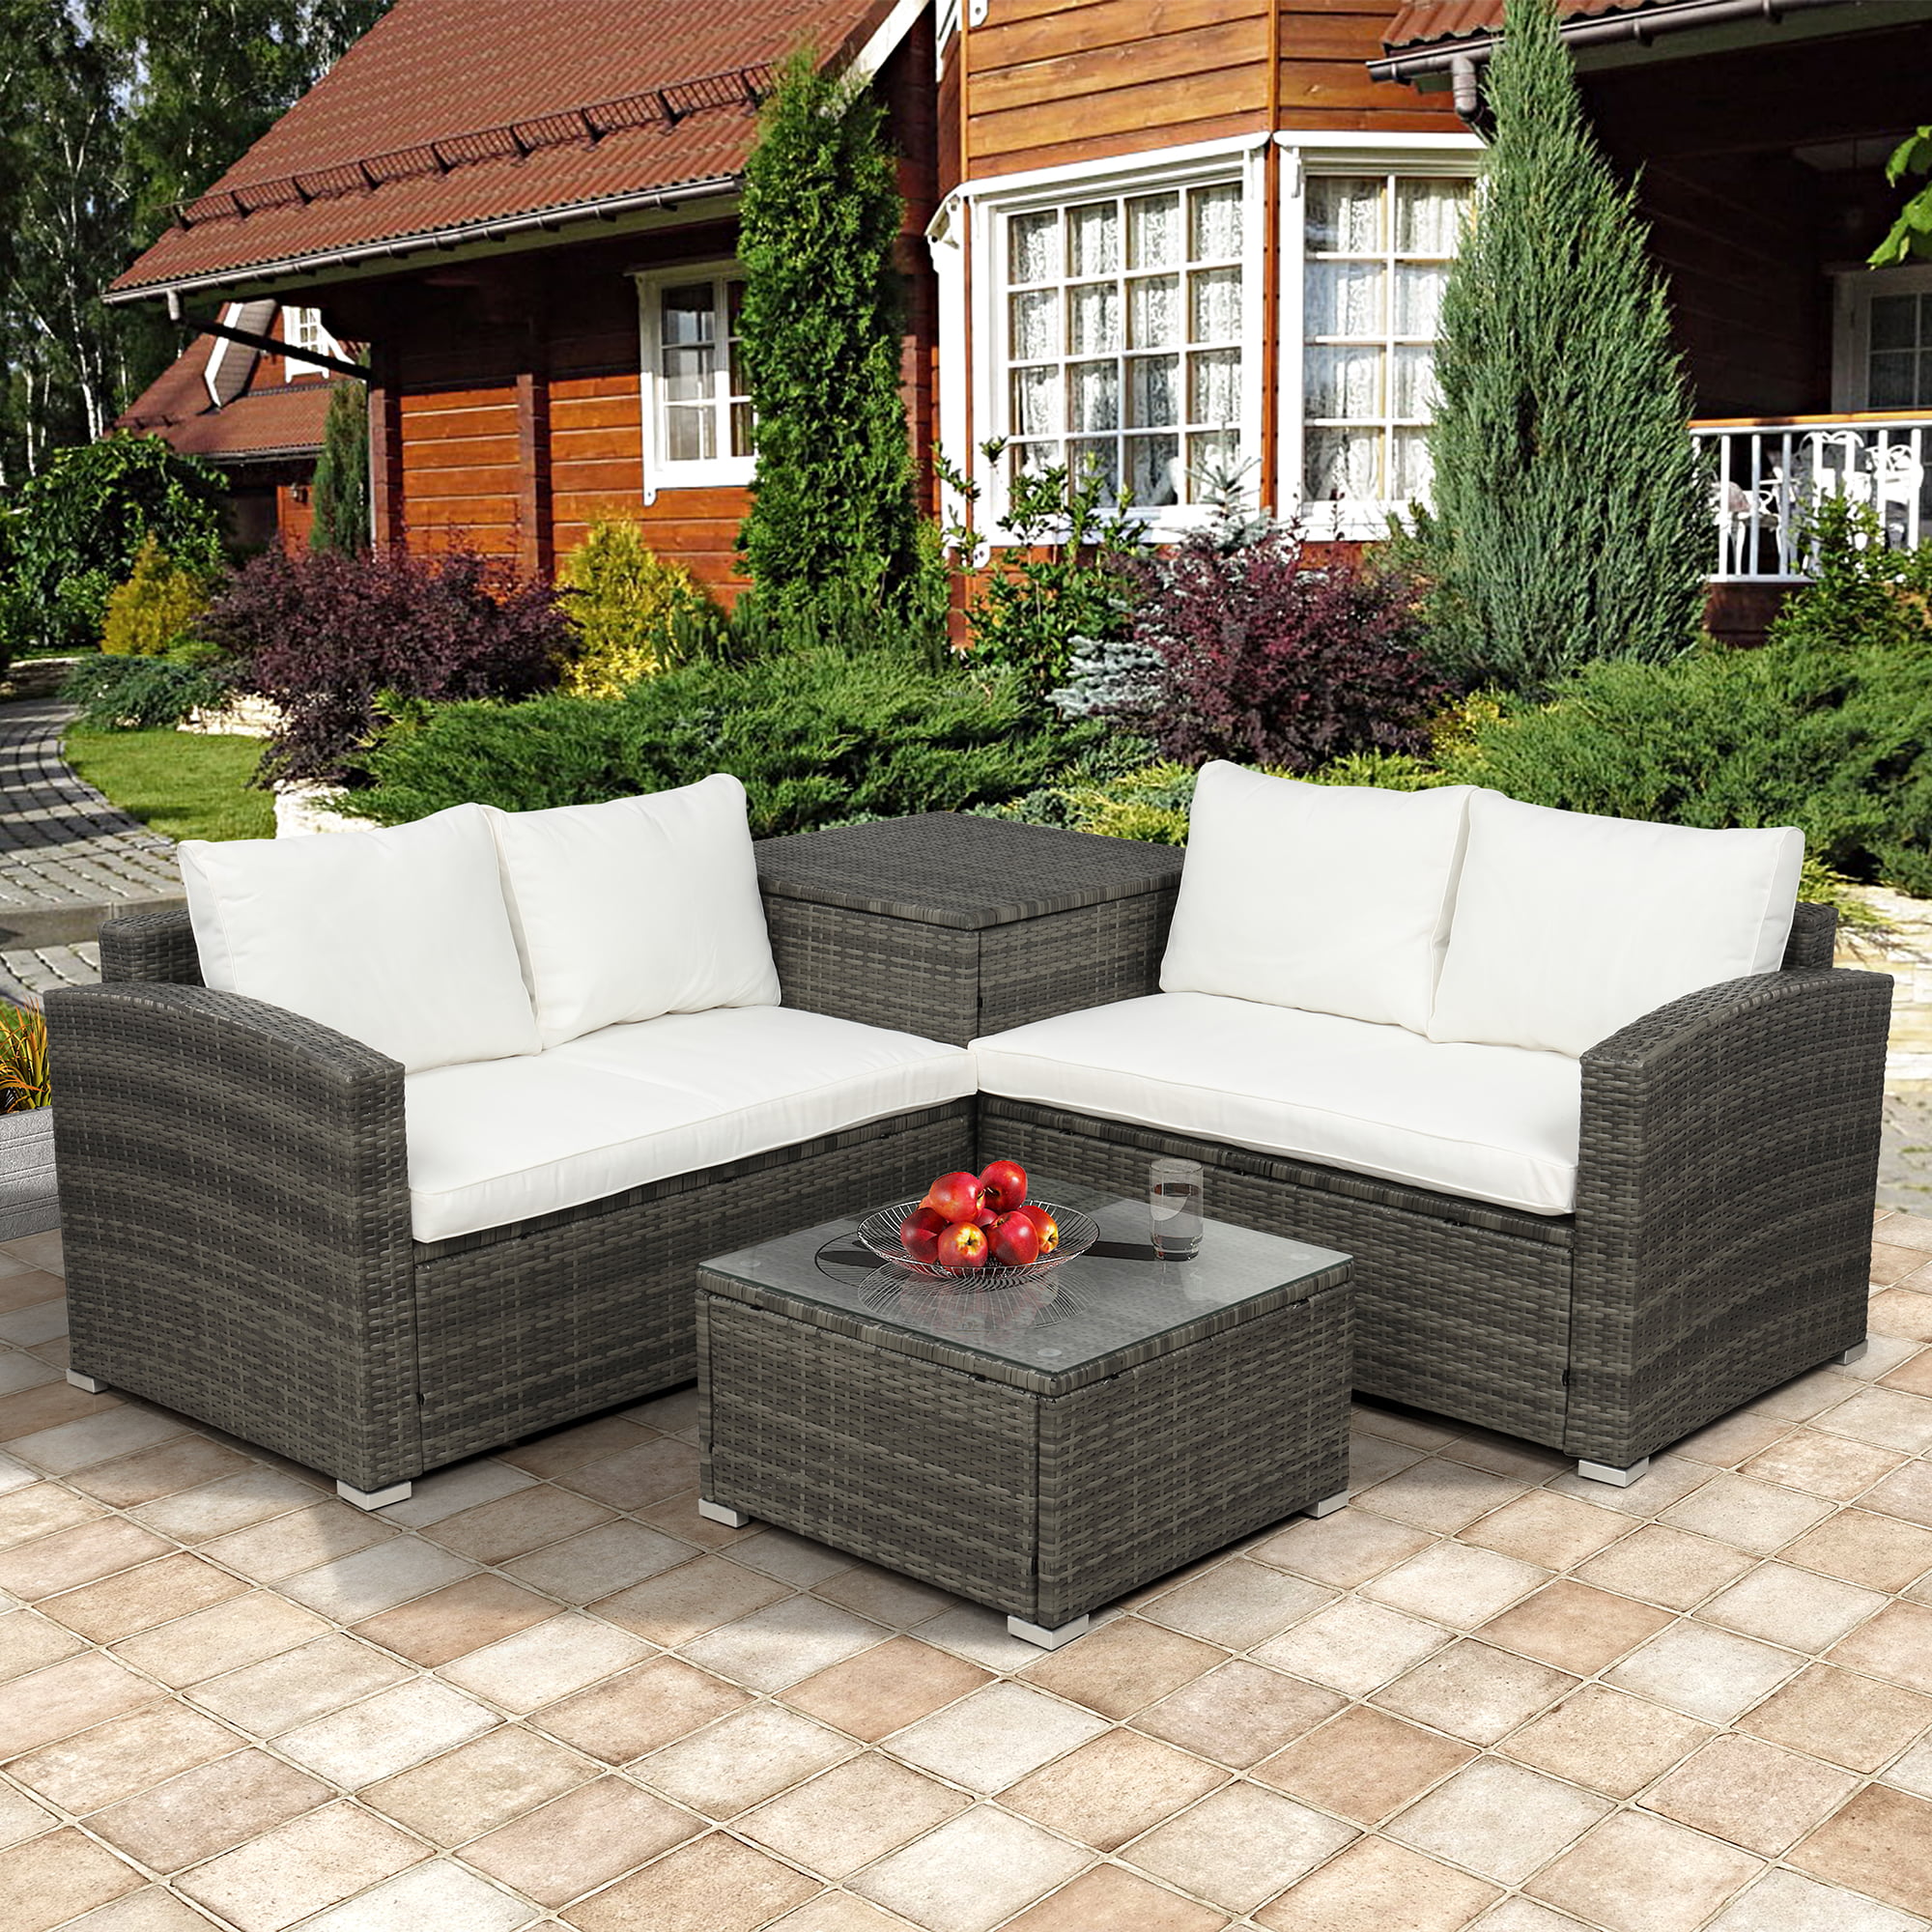 4 Pcs Patio Sectional Sofa Sets Outdoor Patio Furniture Sets Conversation Sets, Wicker Rattan Sectional Couch Sofa Set with Cushions, Pillows and Coffee Table - image 5 of 8